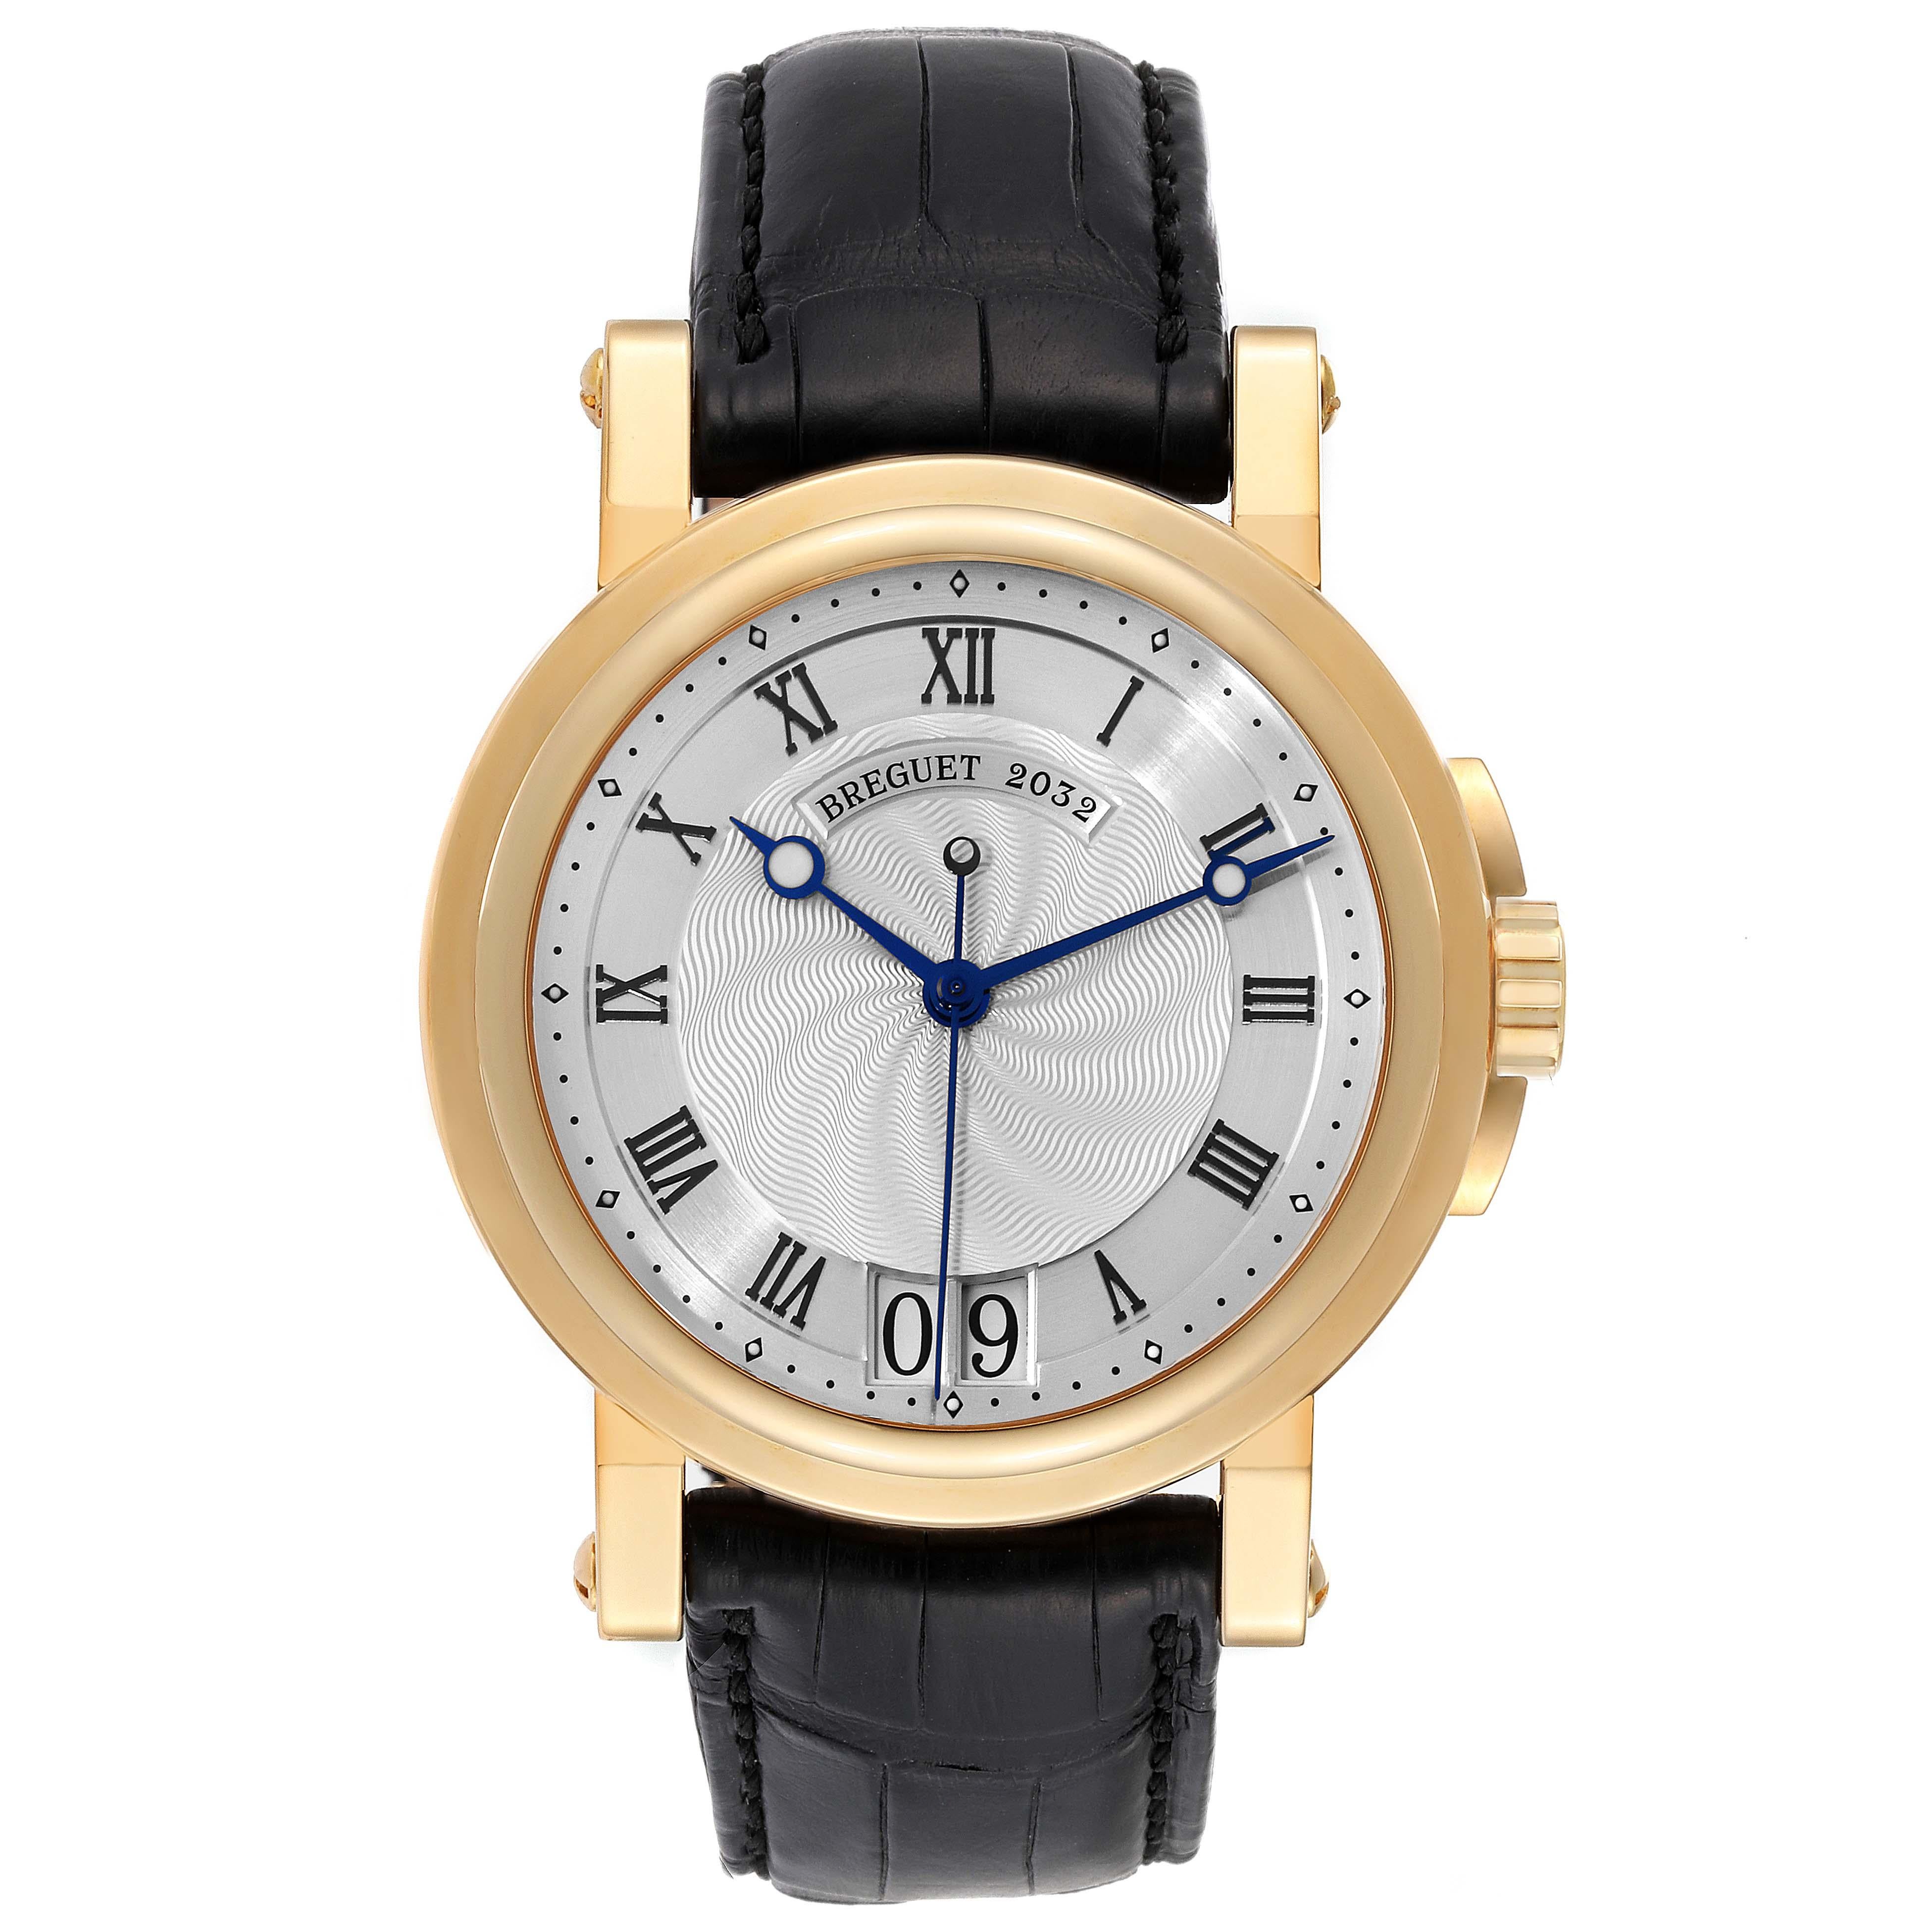 Breguet Marine Big Date Automatic Yellow Gold Mens Watch 5817BA Papers. Automatic self-winding movement. 18K yellow gold coined edged case 39.0 mm in diameter. Transparent exhibition sapphire crystal case back. 18k yellow gold bezel. Scratch